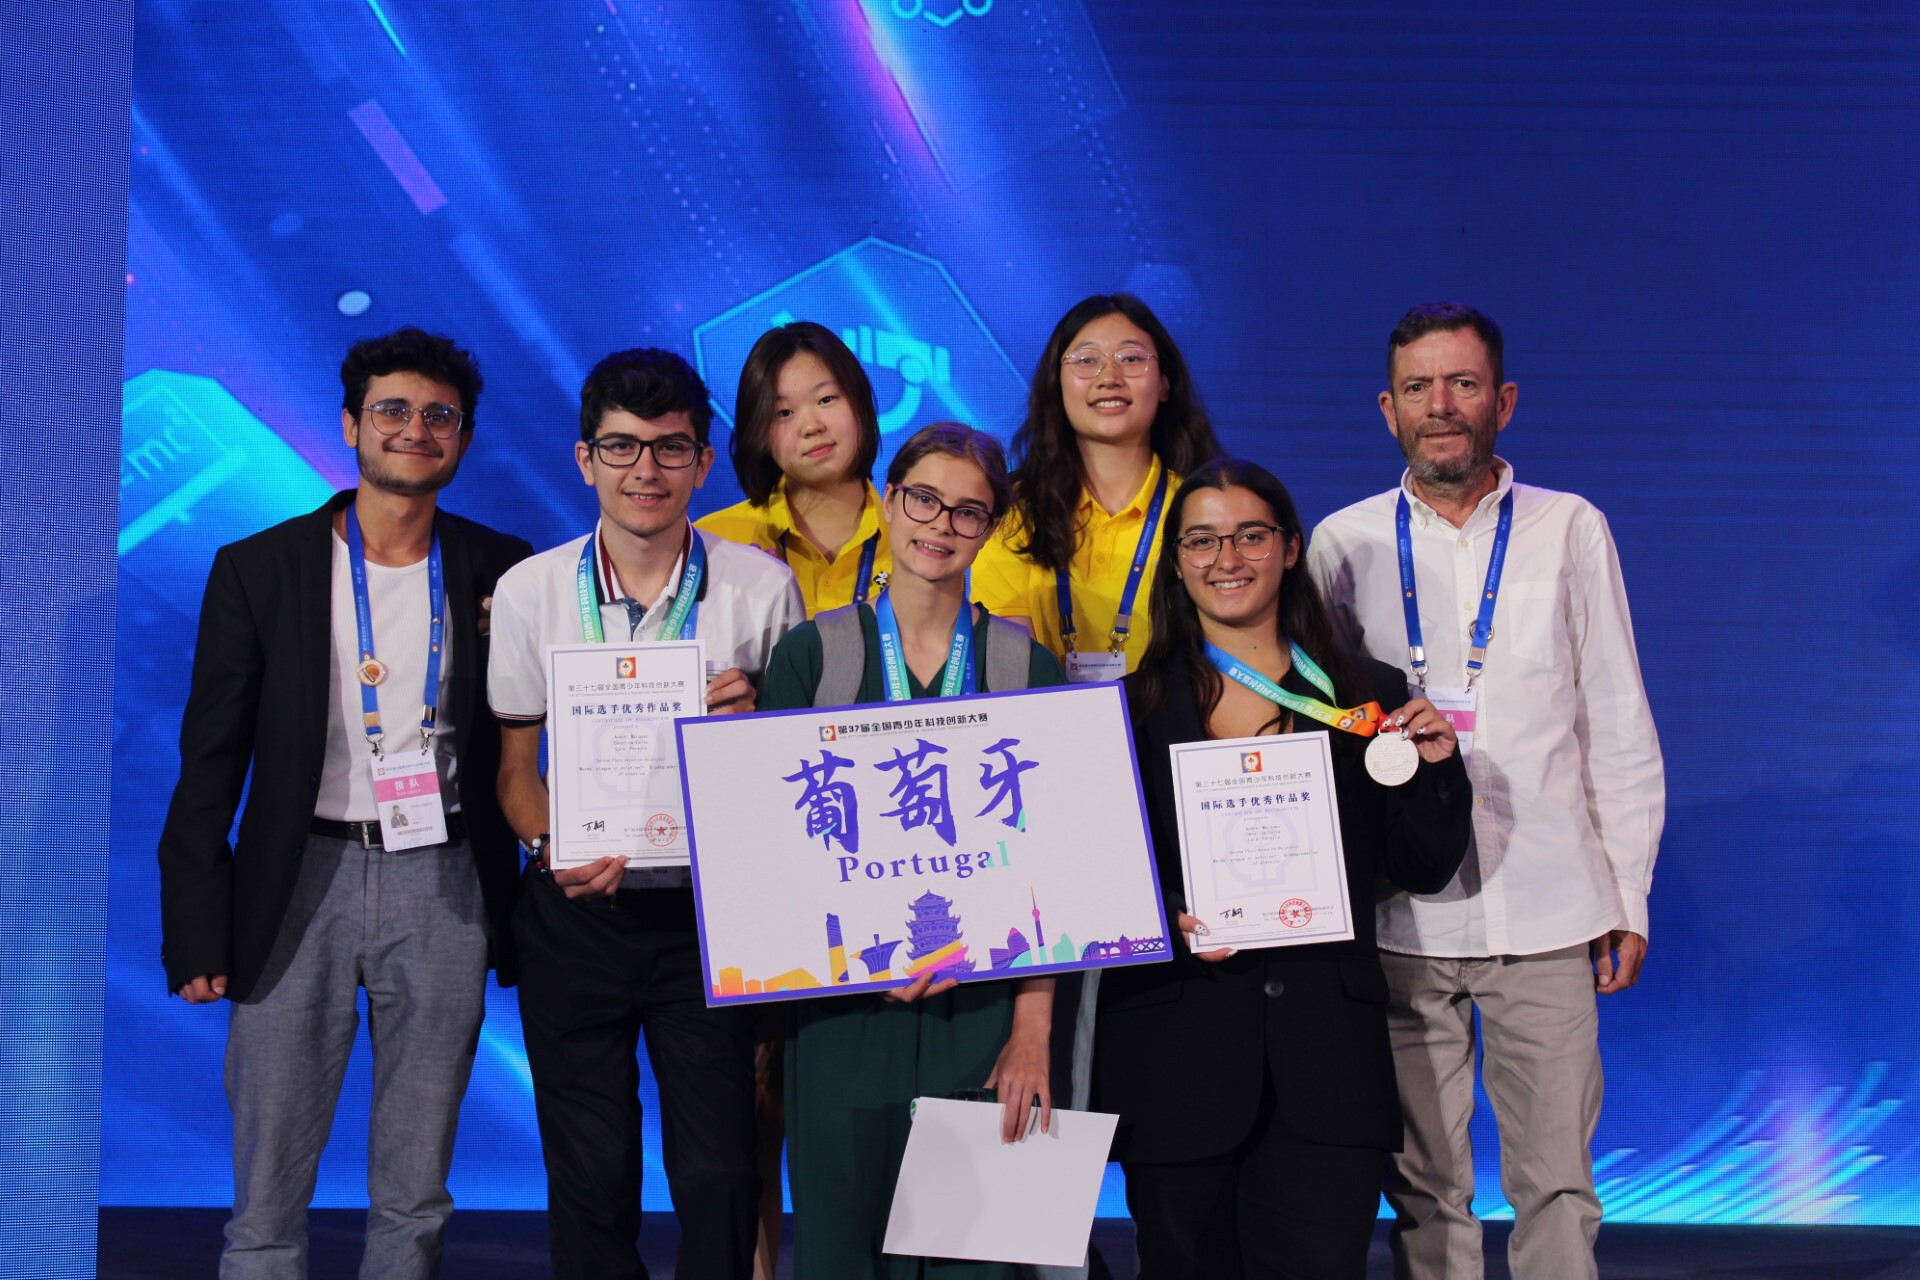 Students from Ovar shine in a science competition in China